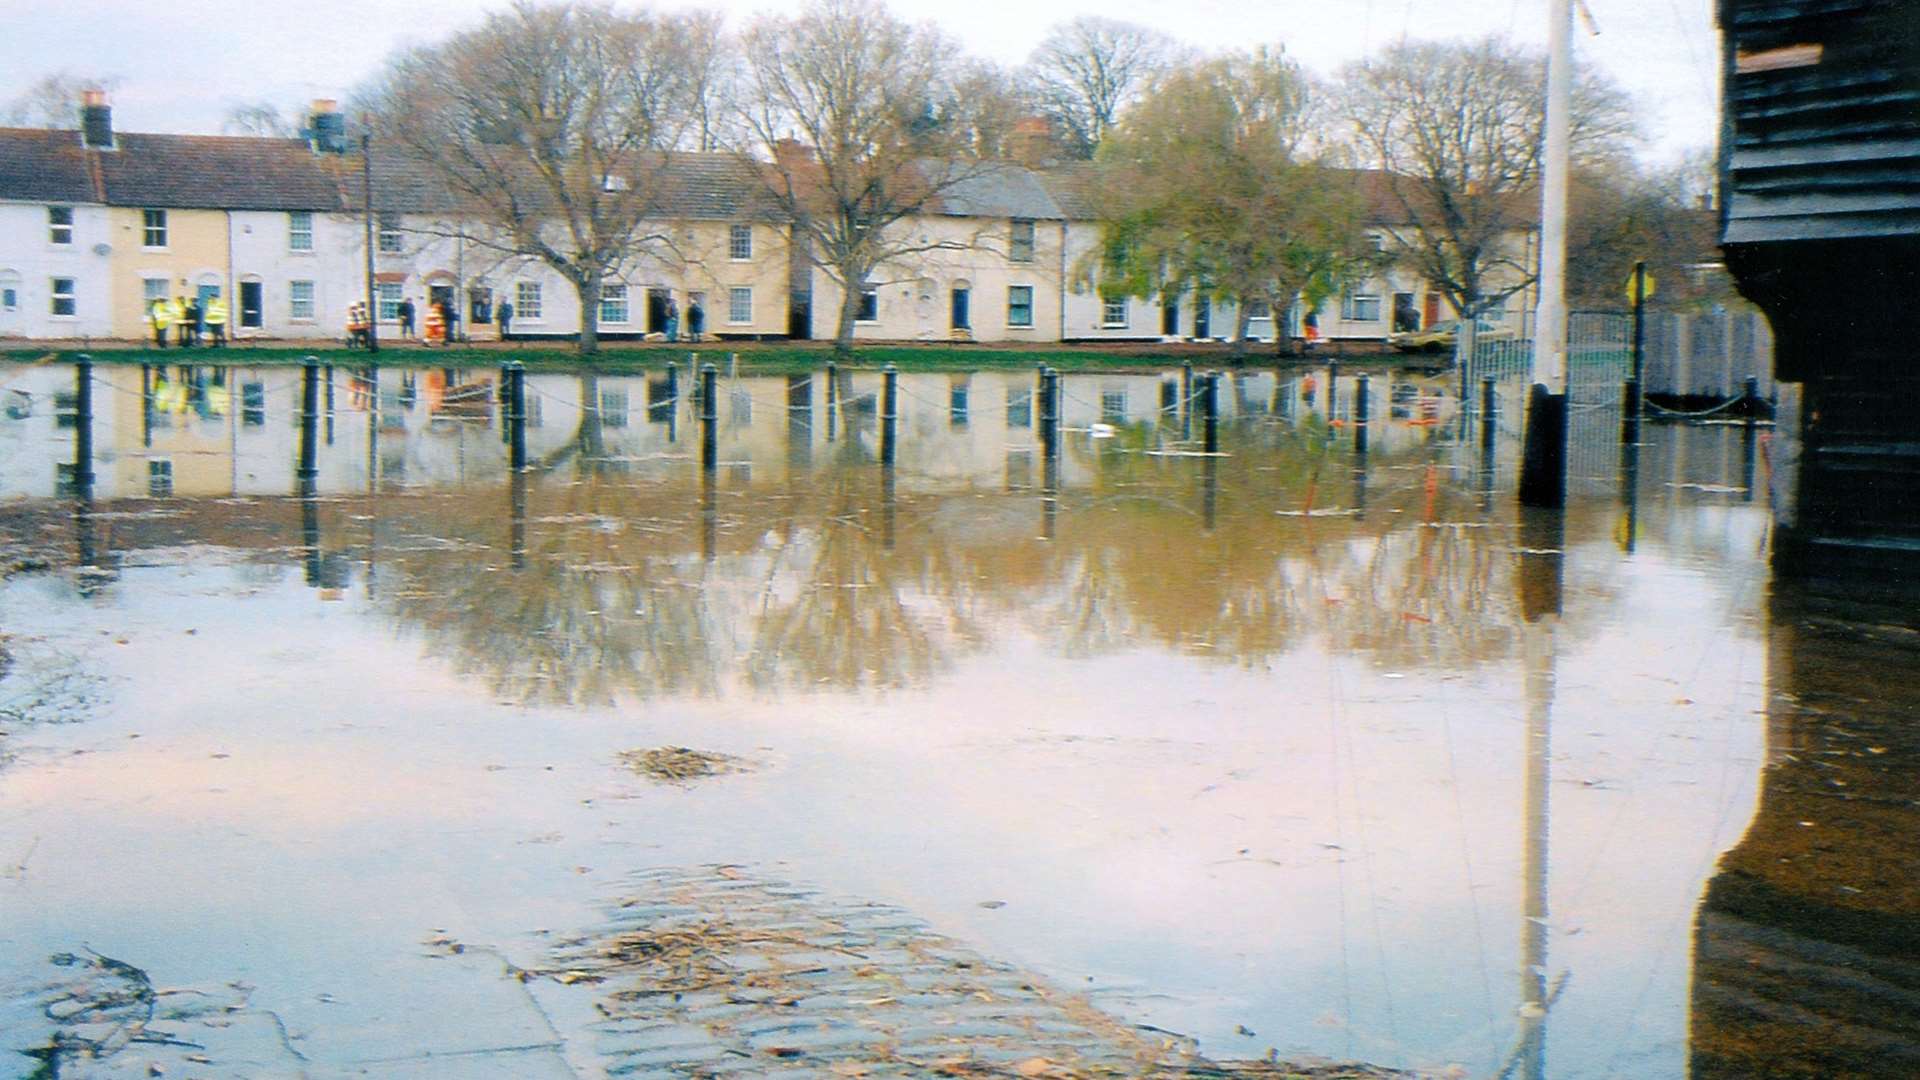 Second prize: Reflection after the floods, by Frances Ward, December 6, 2013